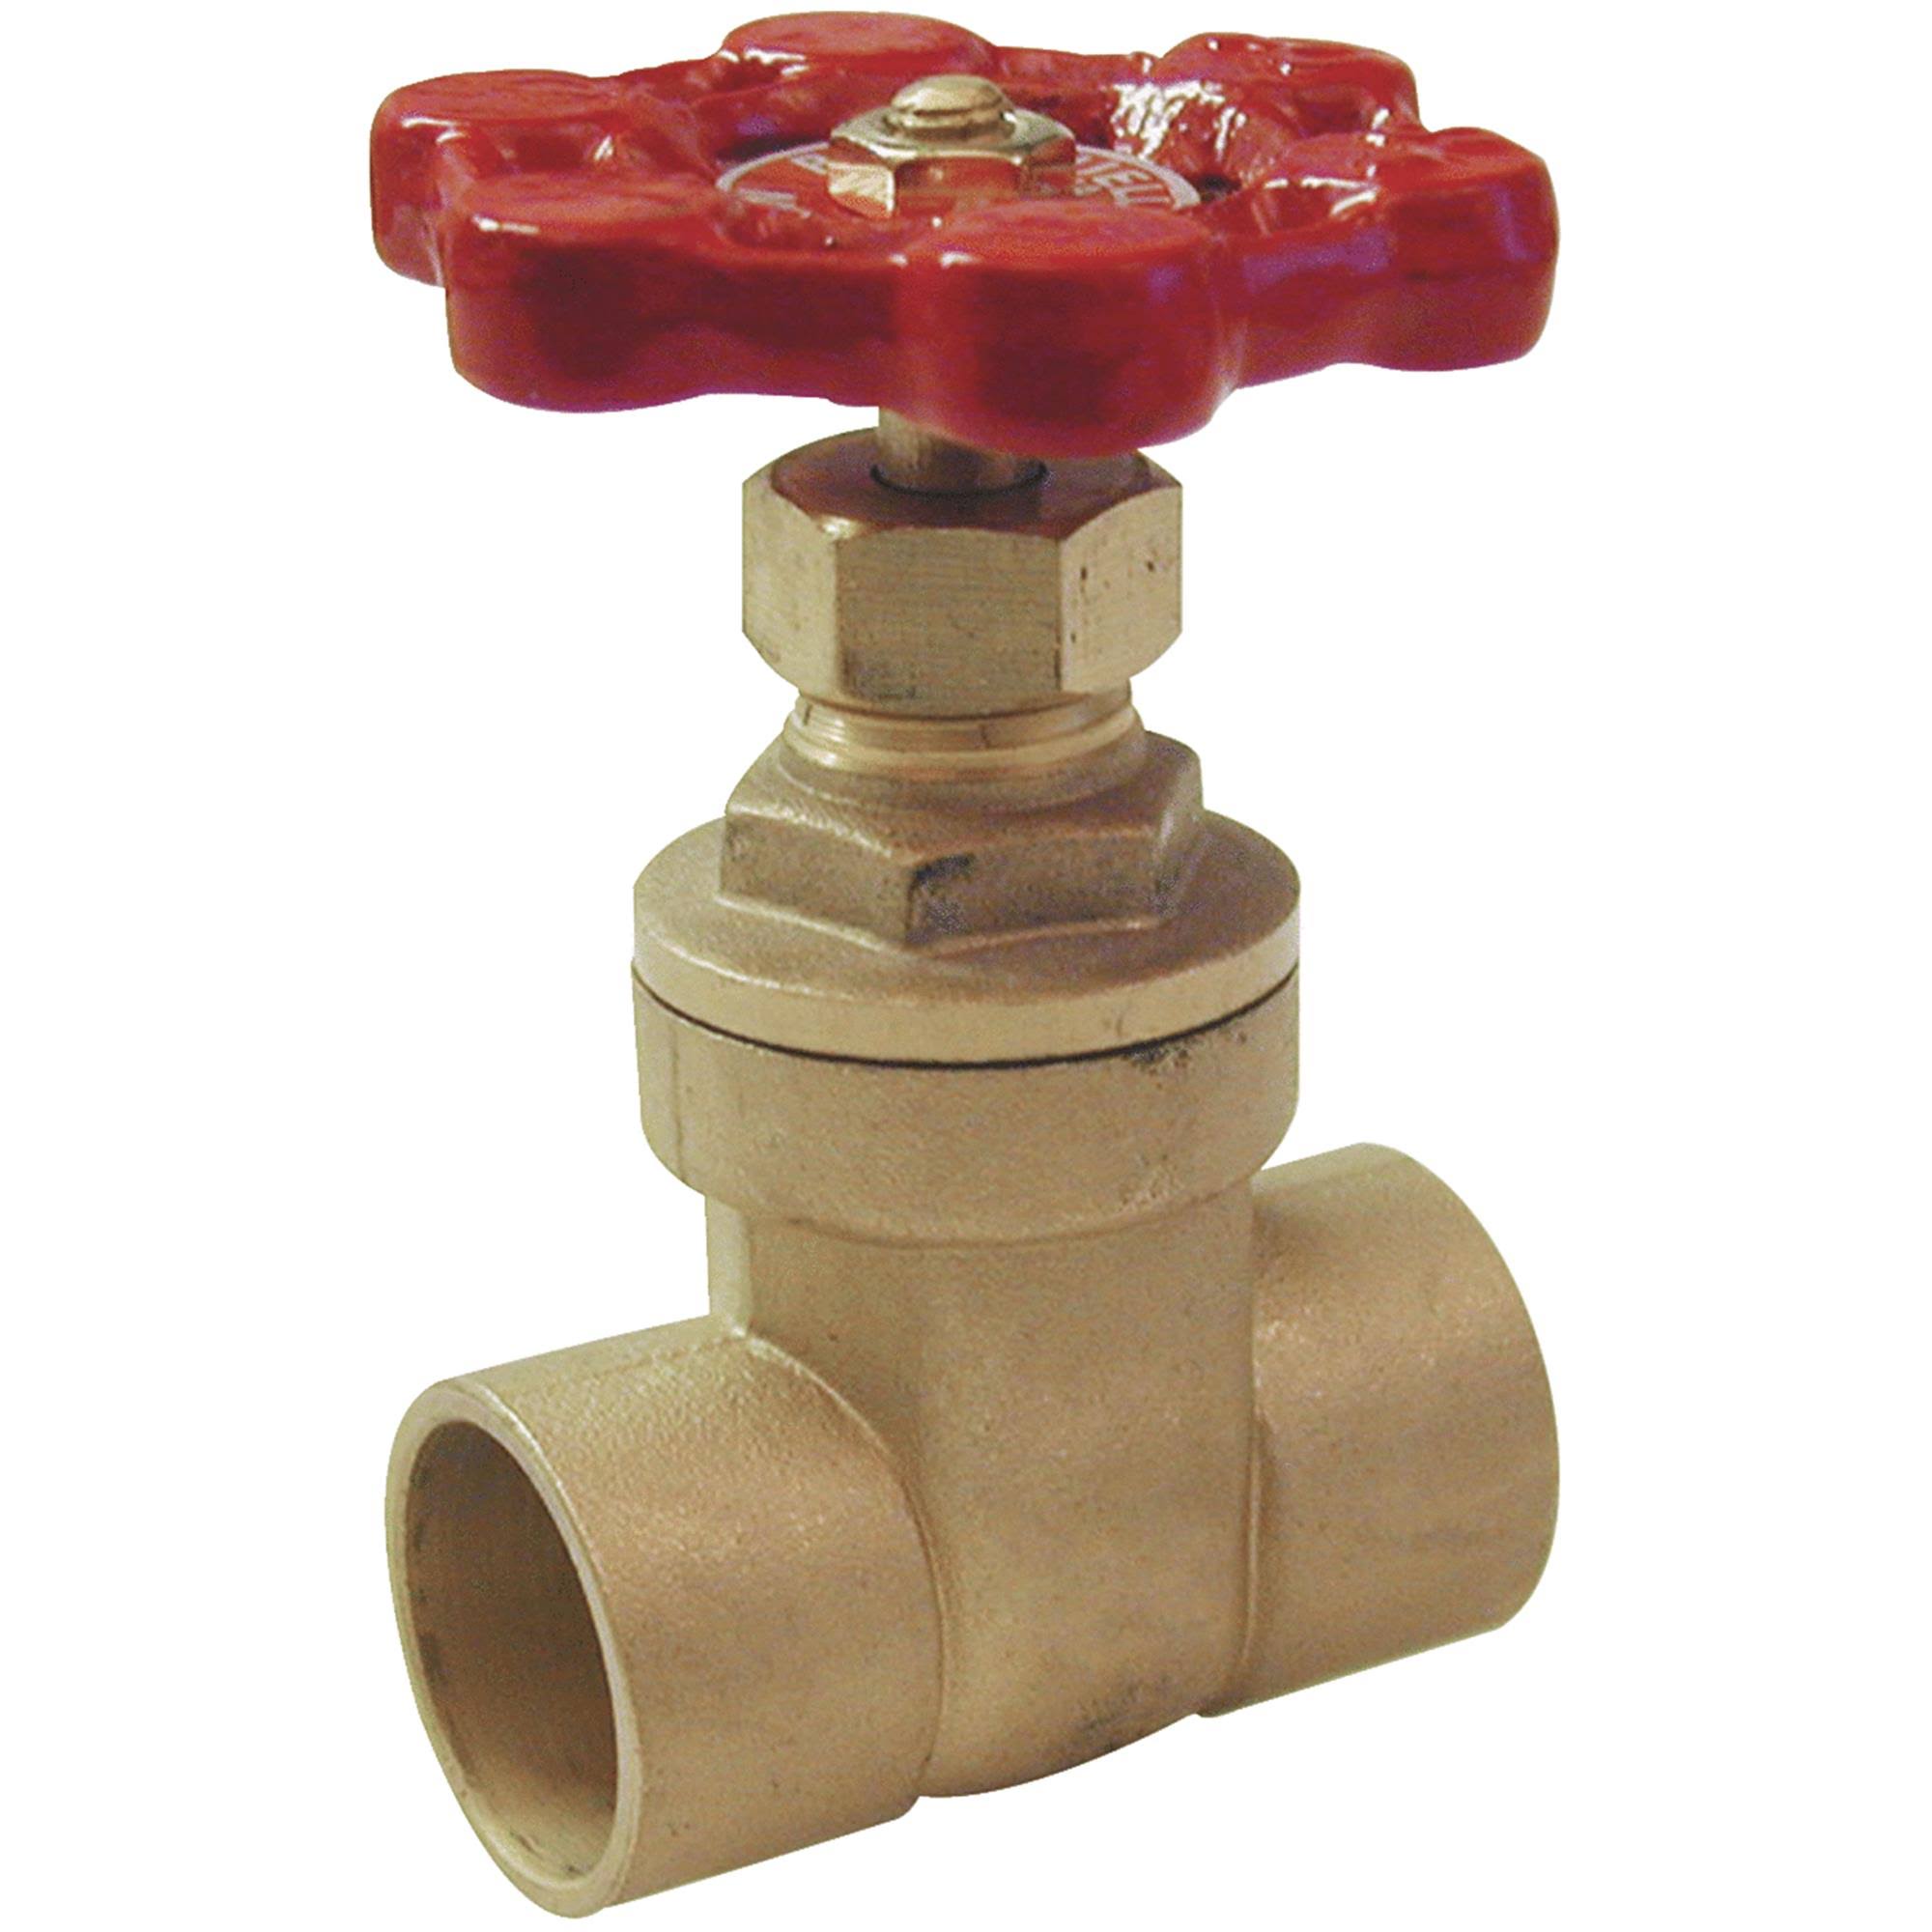 B and K Industries 100-454NL Lead-Free Gate Valve - 3/4"